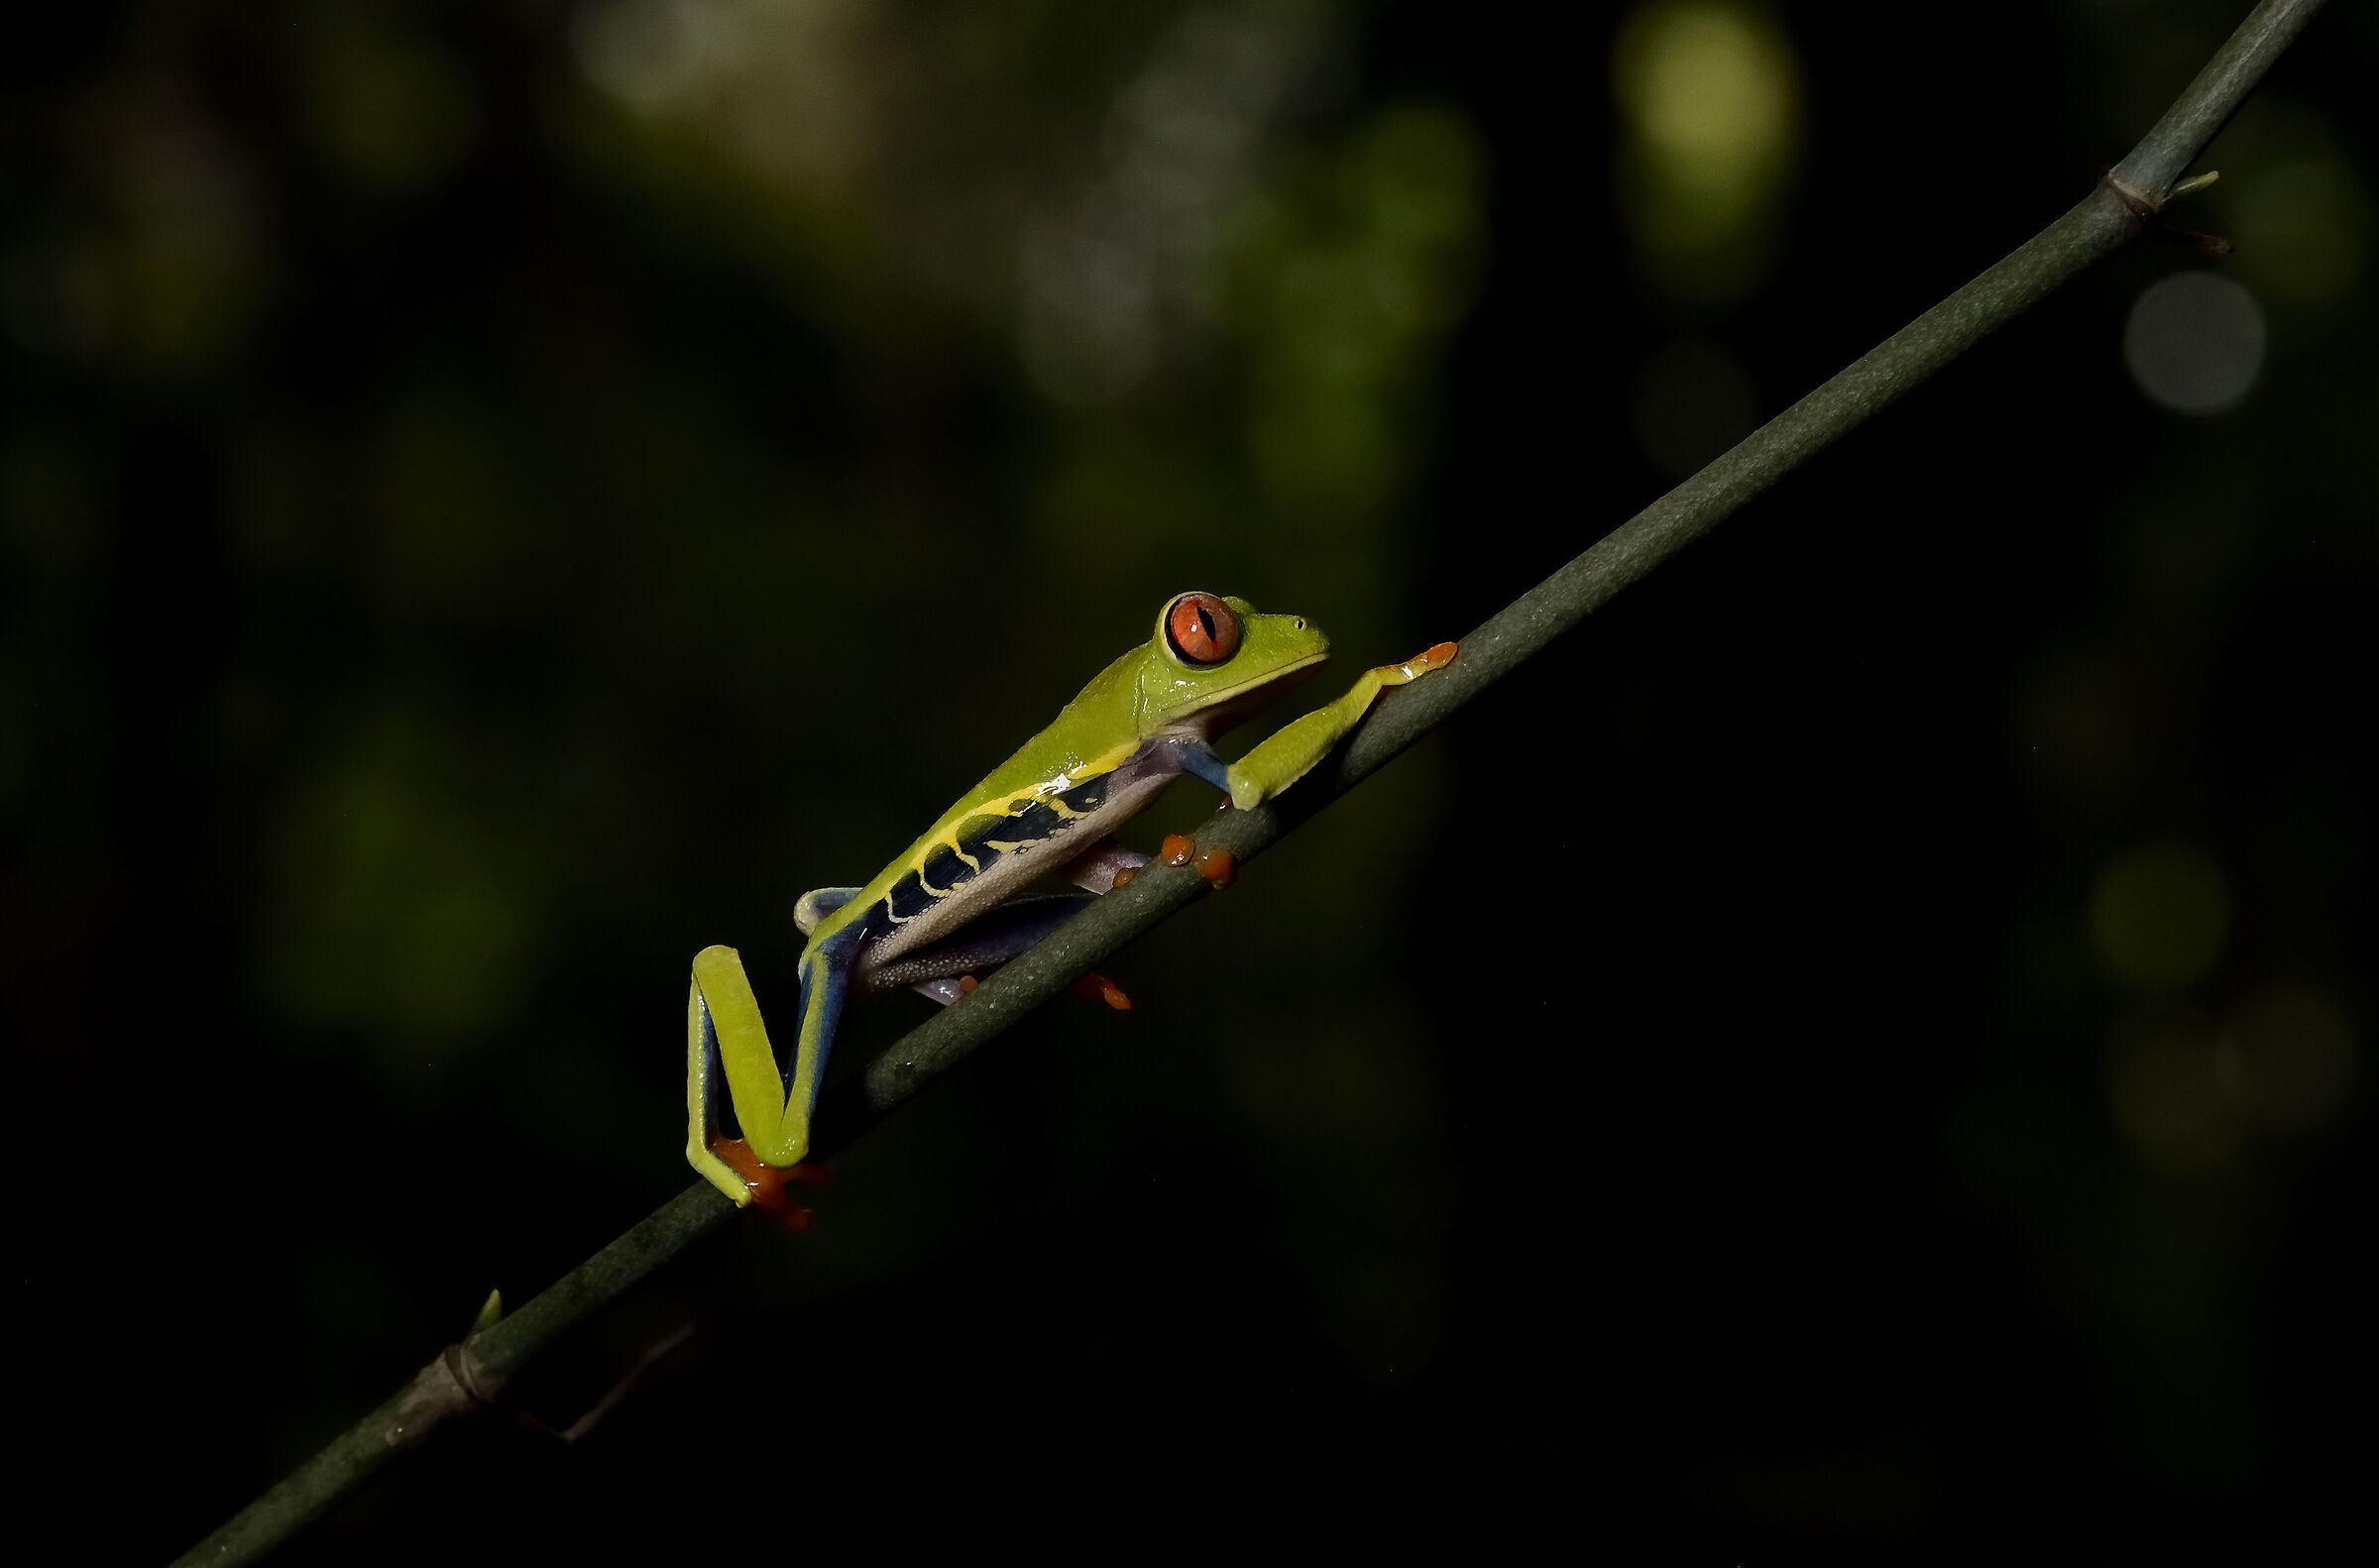 The magnificent and iconic Red-eye three frog...